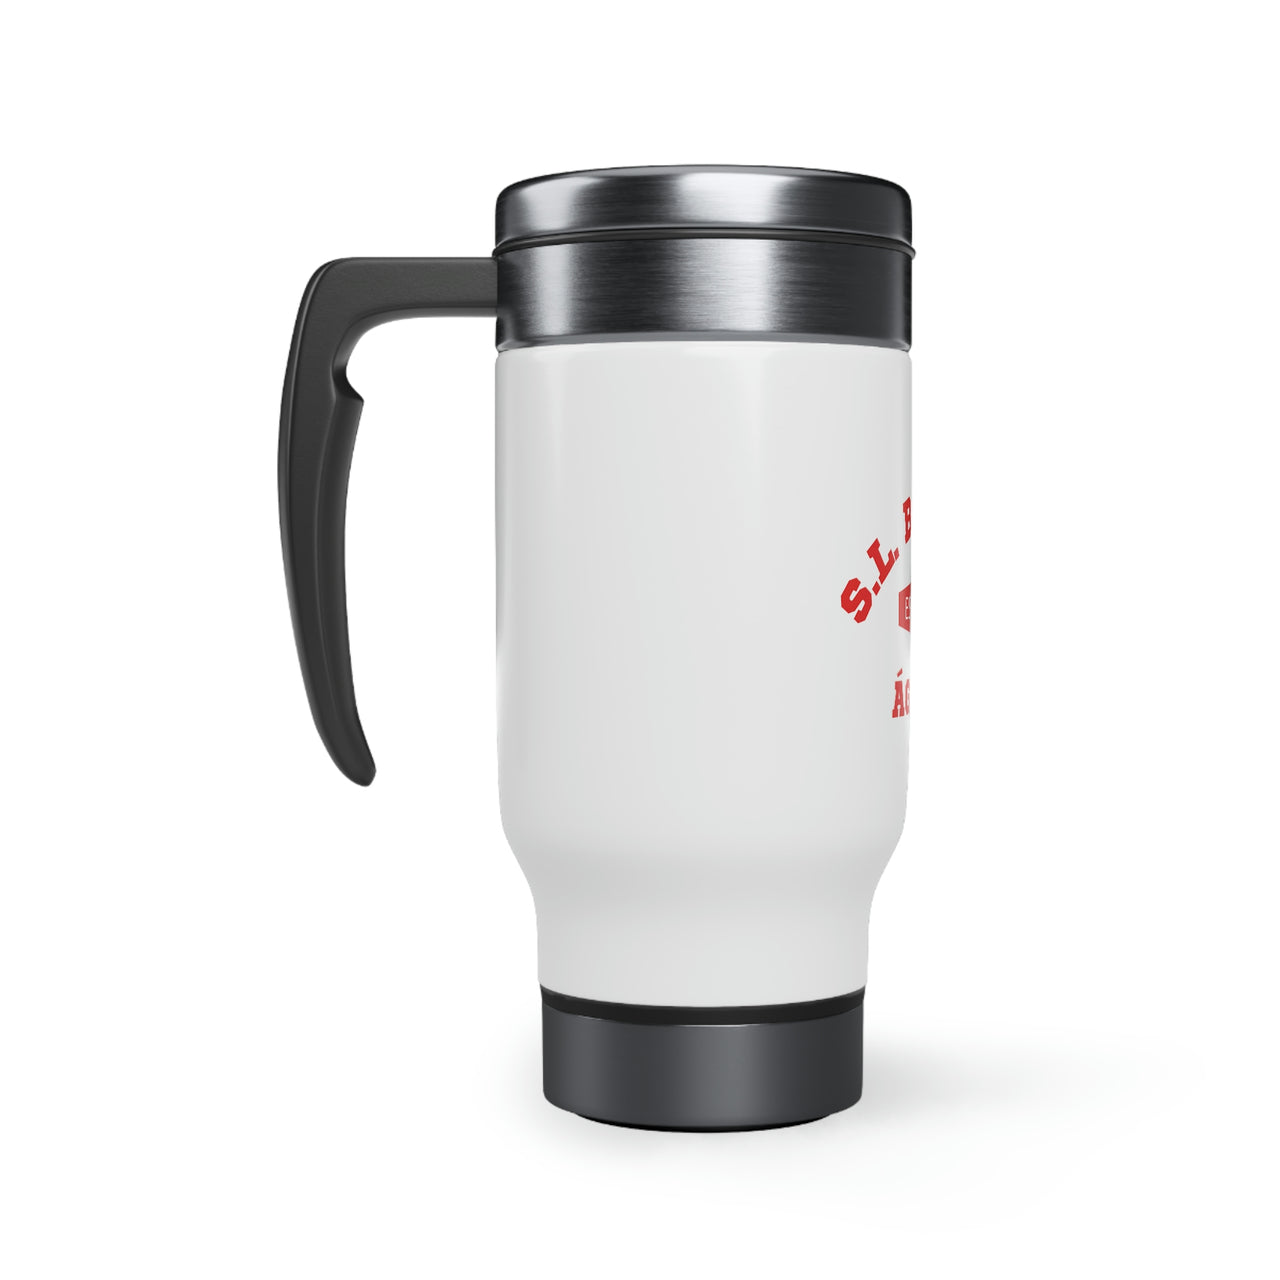 Benfica Stainless Steel Travel Mug with Handle, 14oz